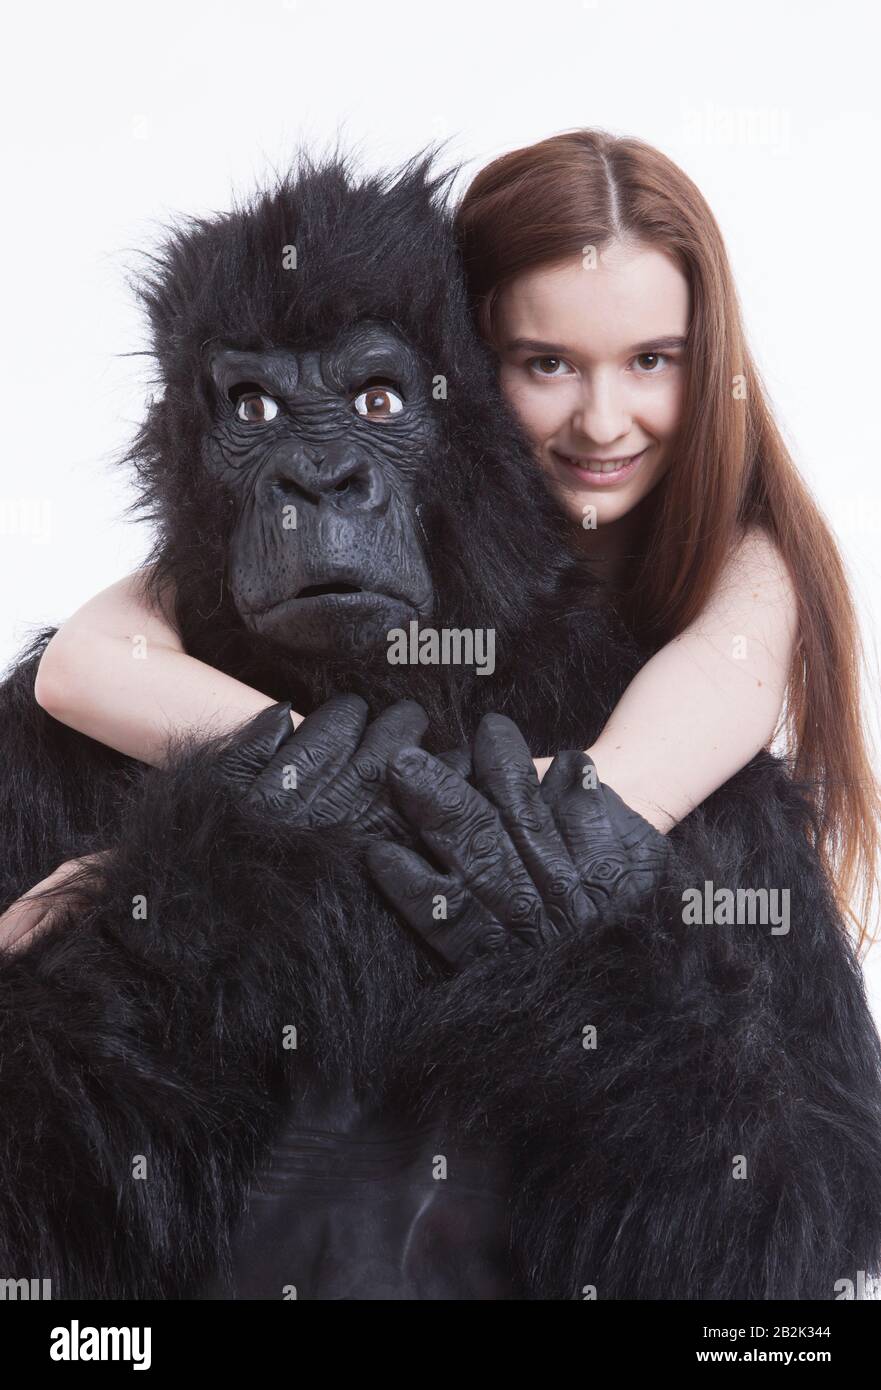 Portrait of smiling young woman hugging man in gorilla costume against white background Stock Photo